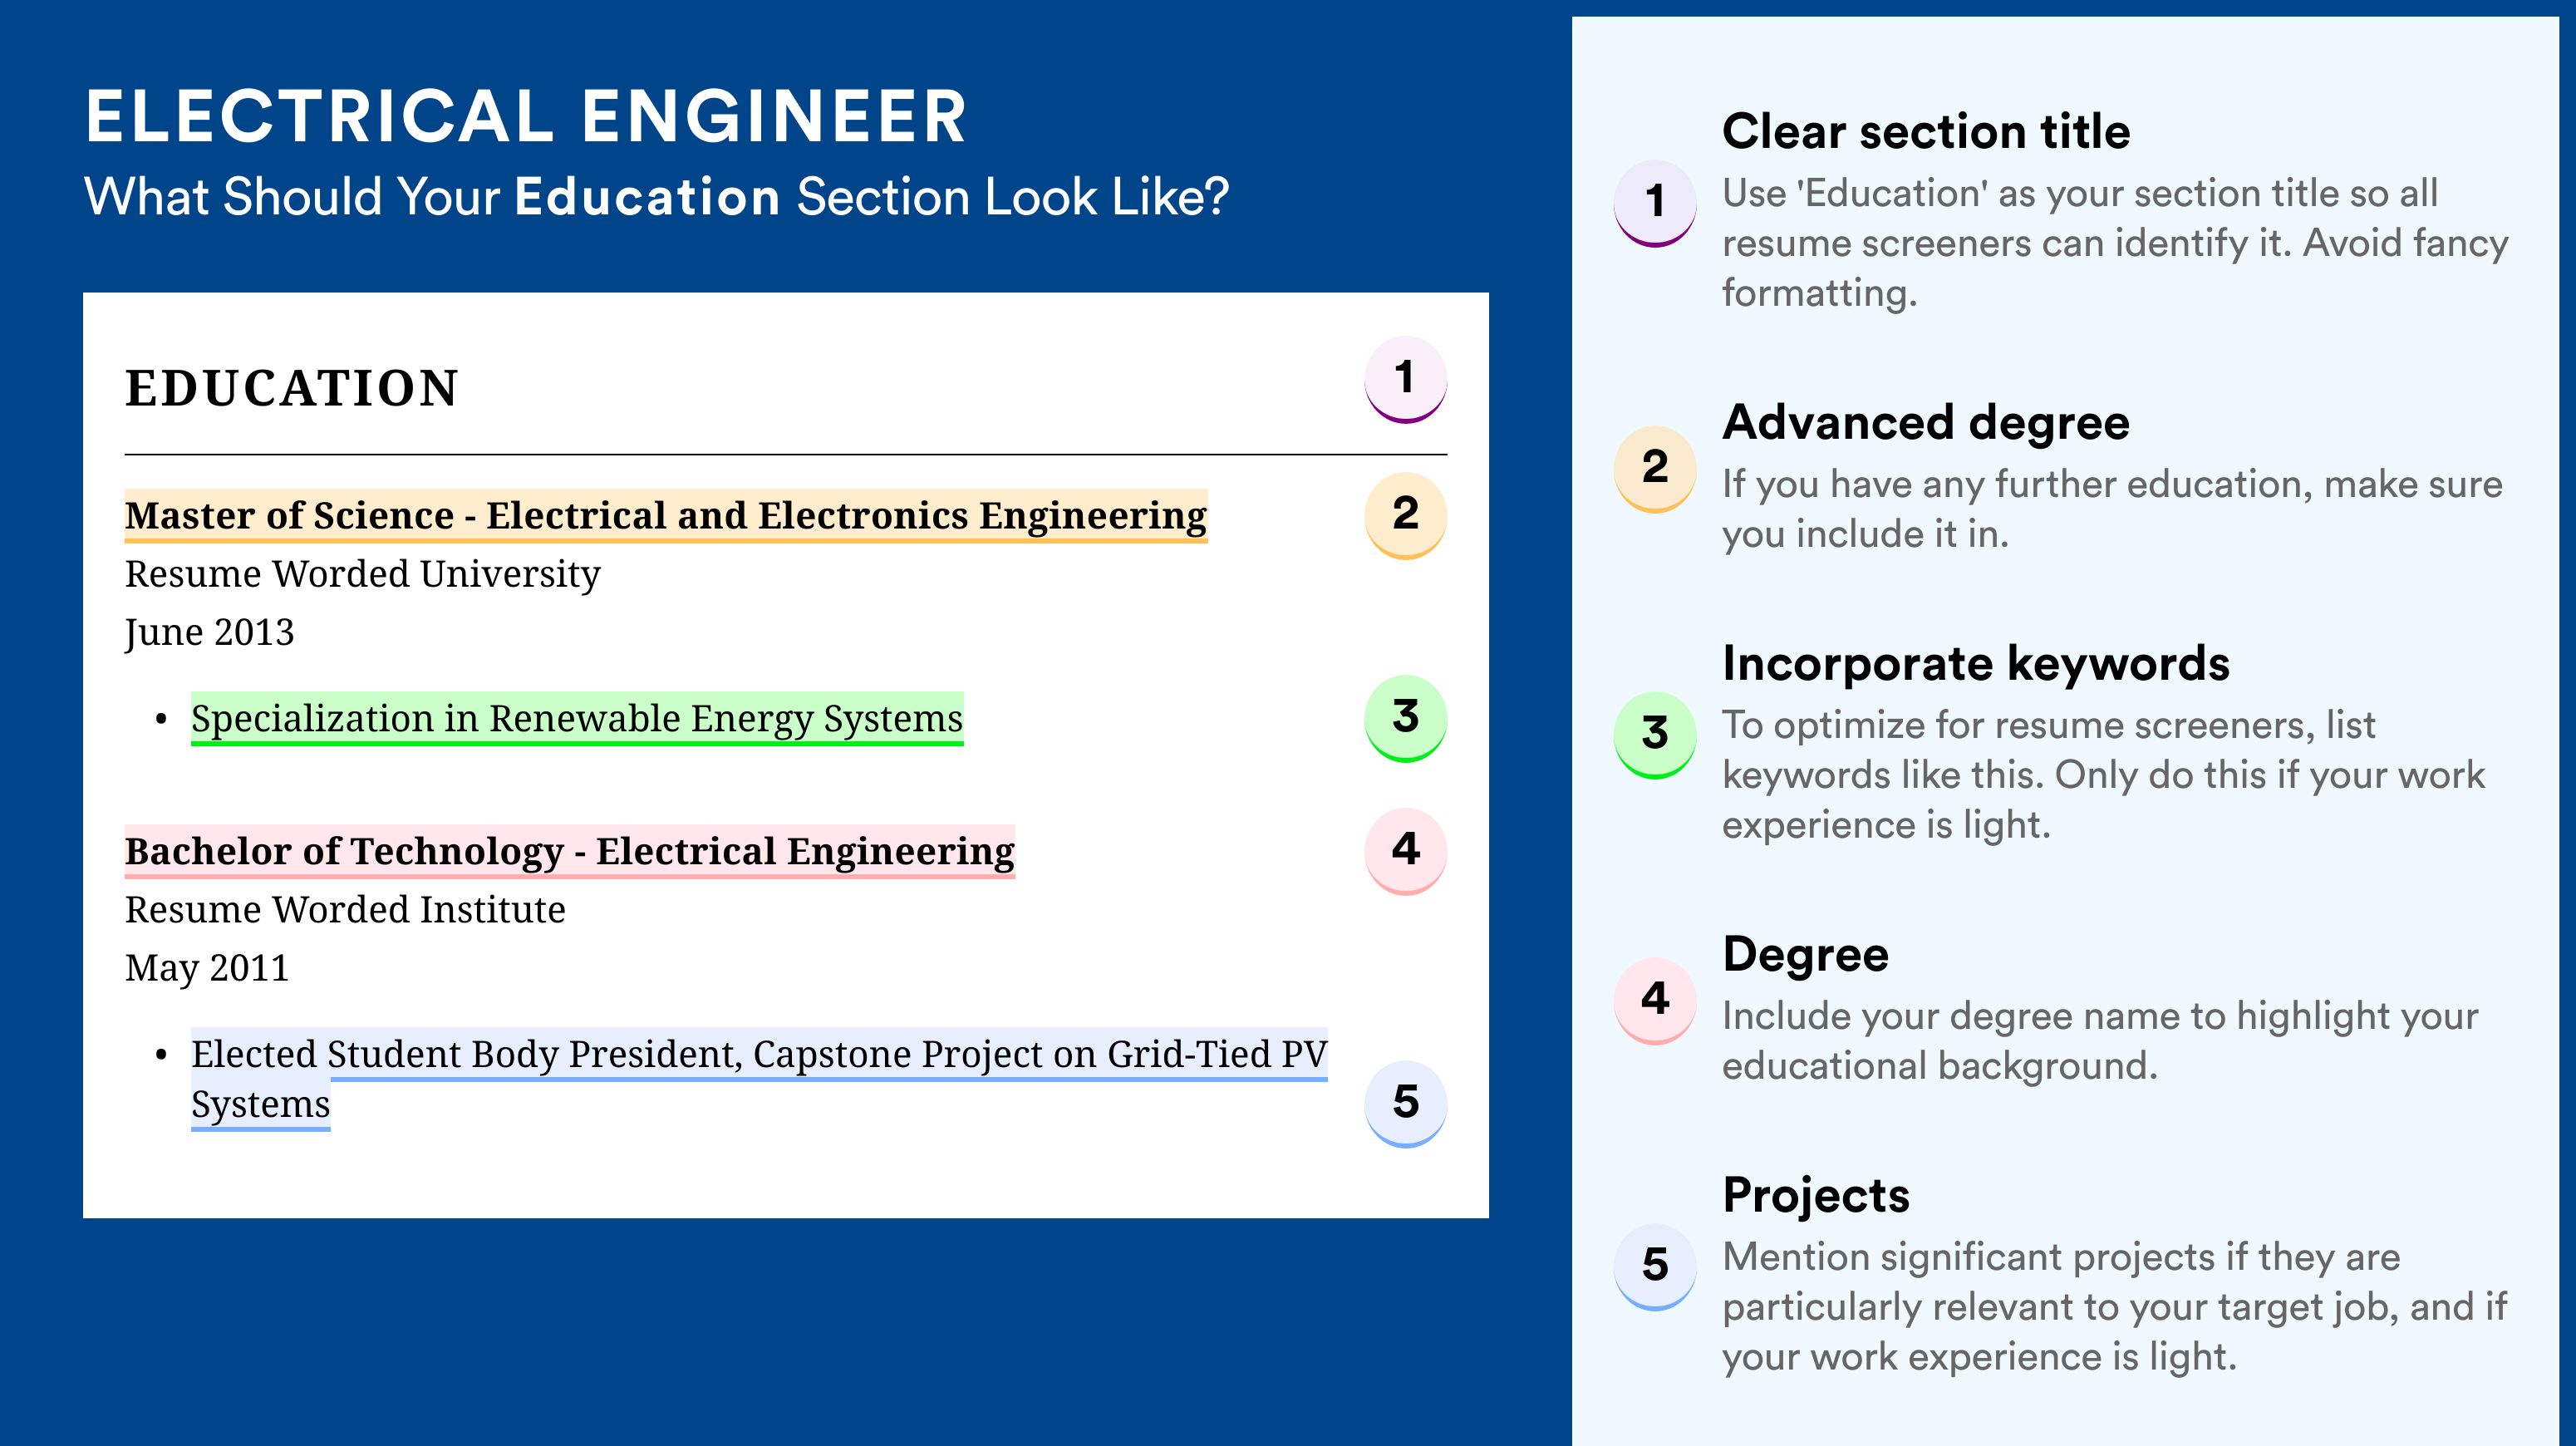 How To Write An Education Section - Electrical Engineer Roles